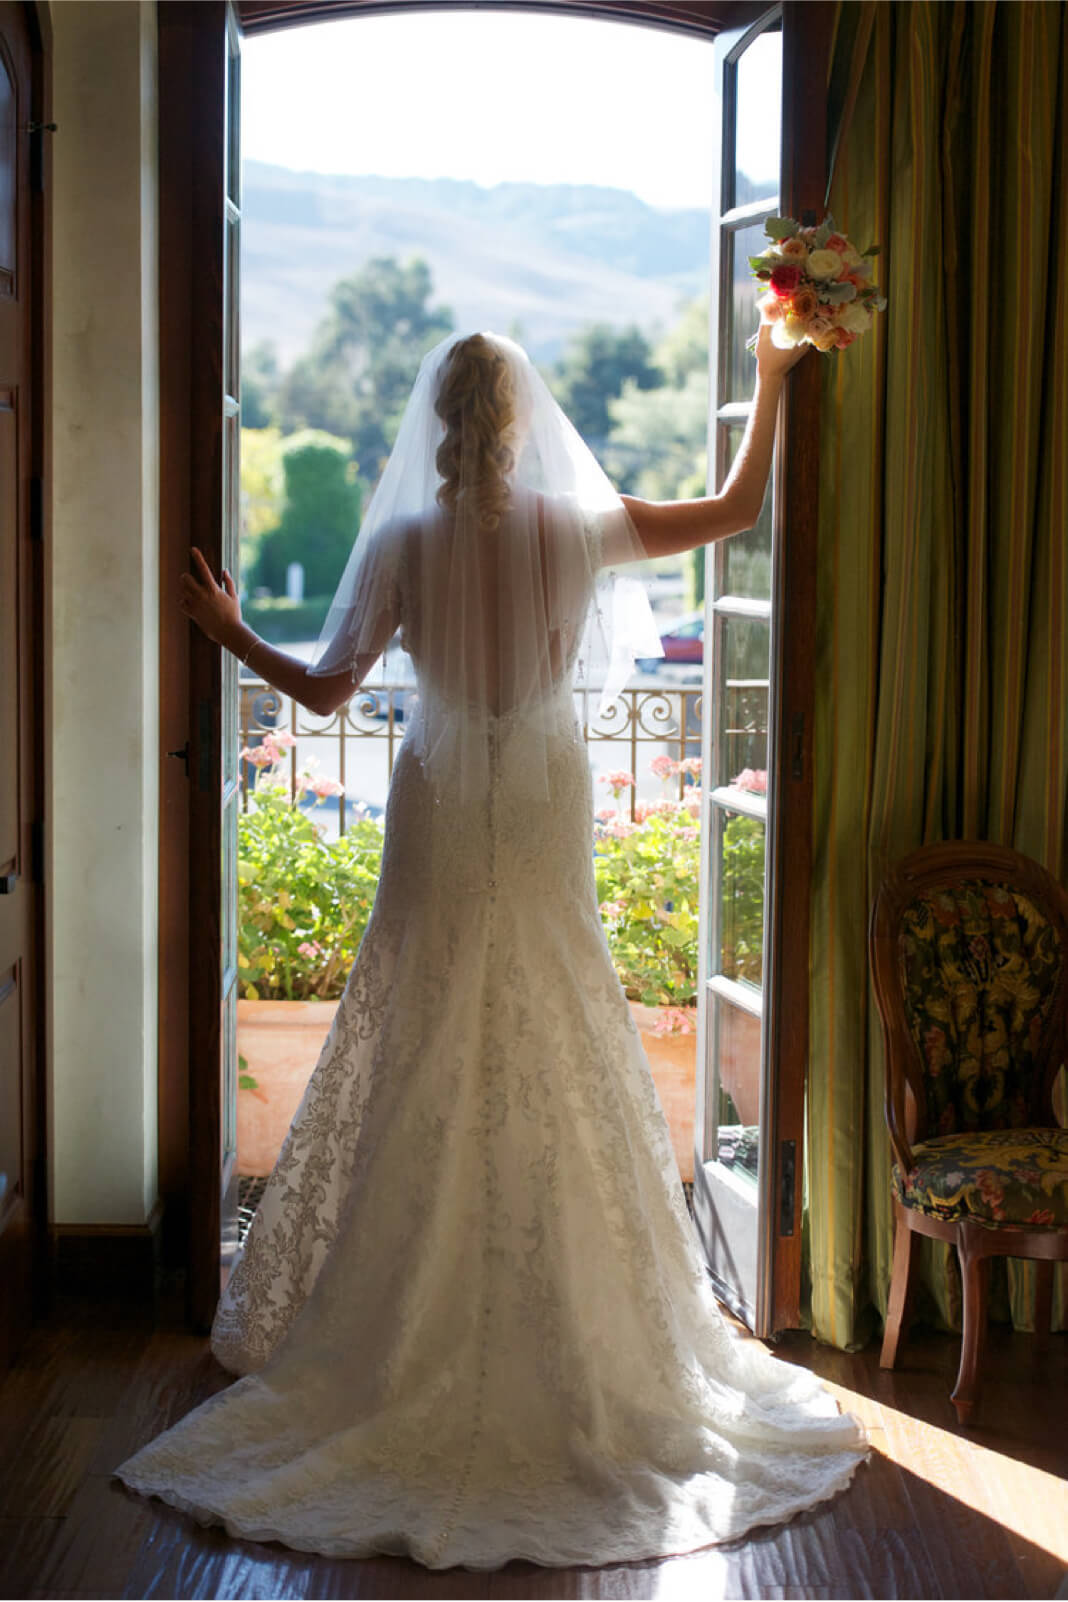 Bride is photographed from behind on her big day